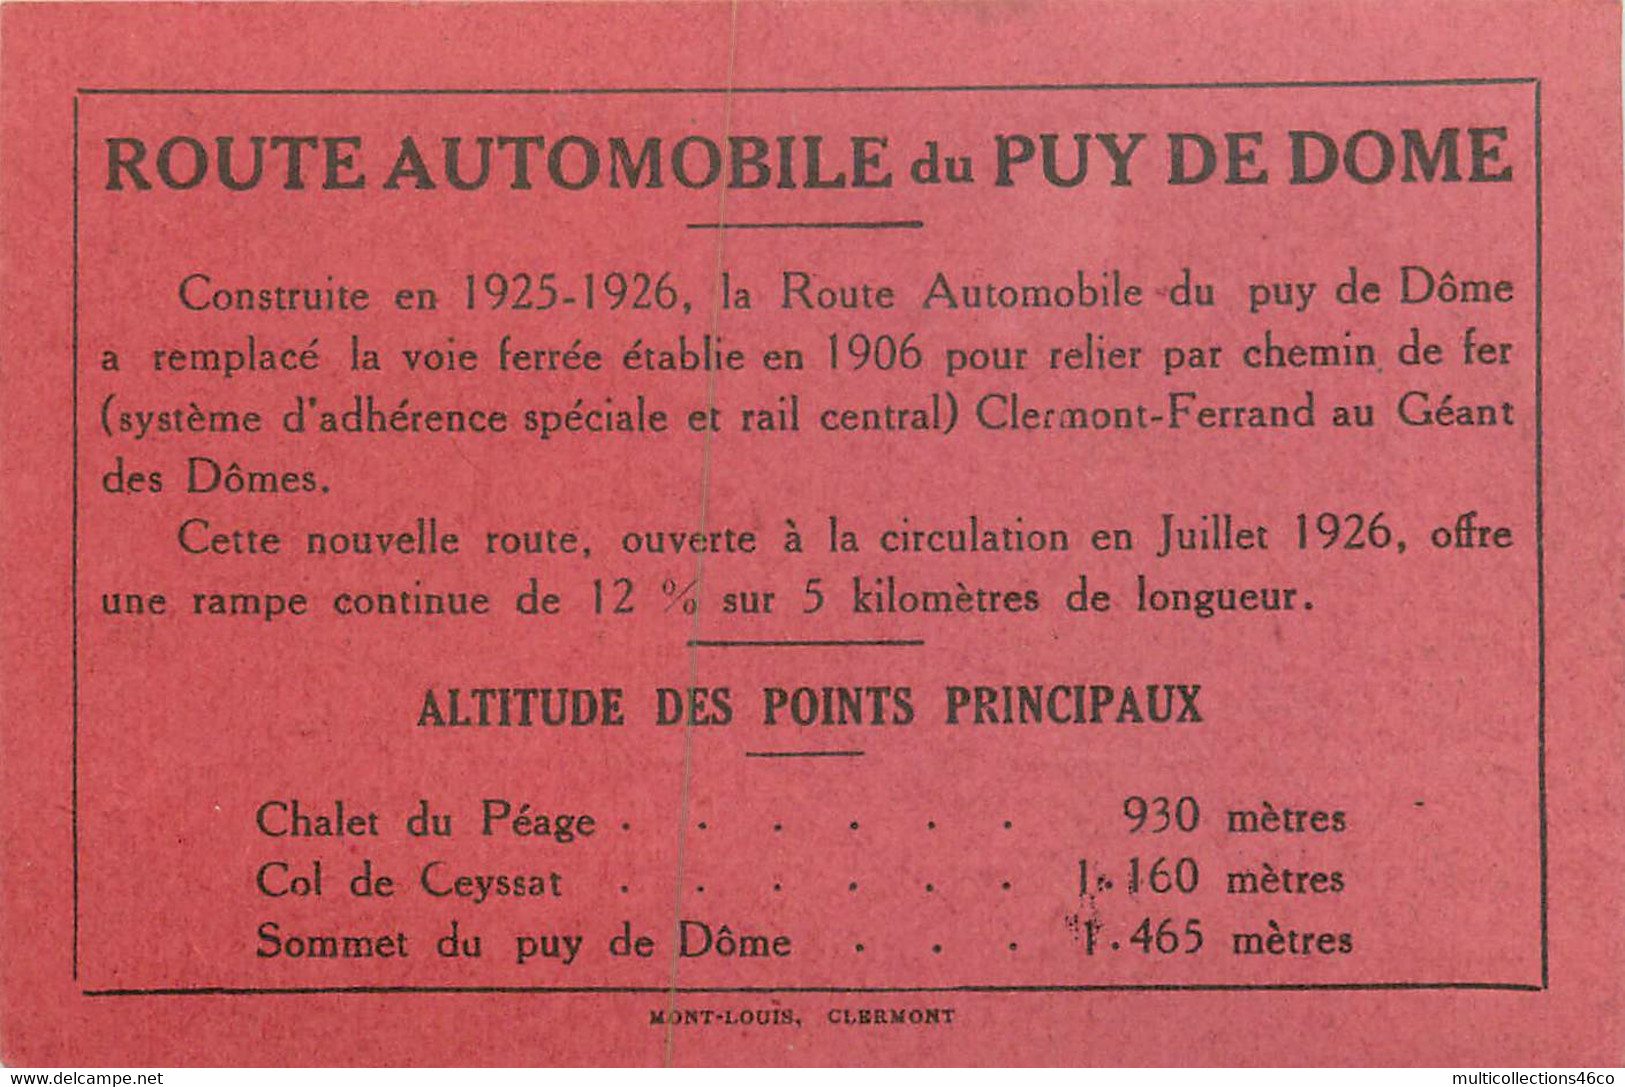 030222A - TICKET Cie TRAMWAY CLERMONT FERRAND PUY DE DOME Route Automobile Voiture N° 30672 - Europe